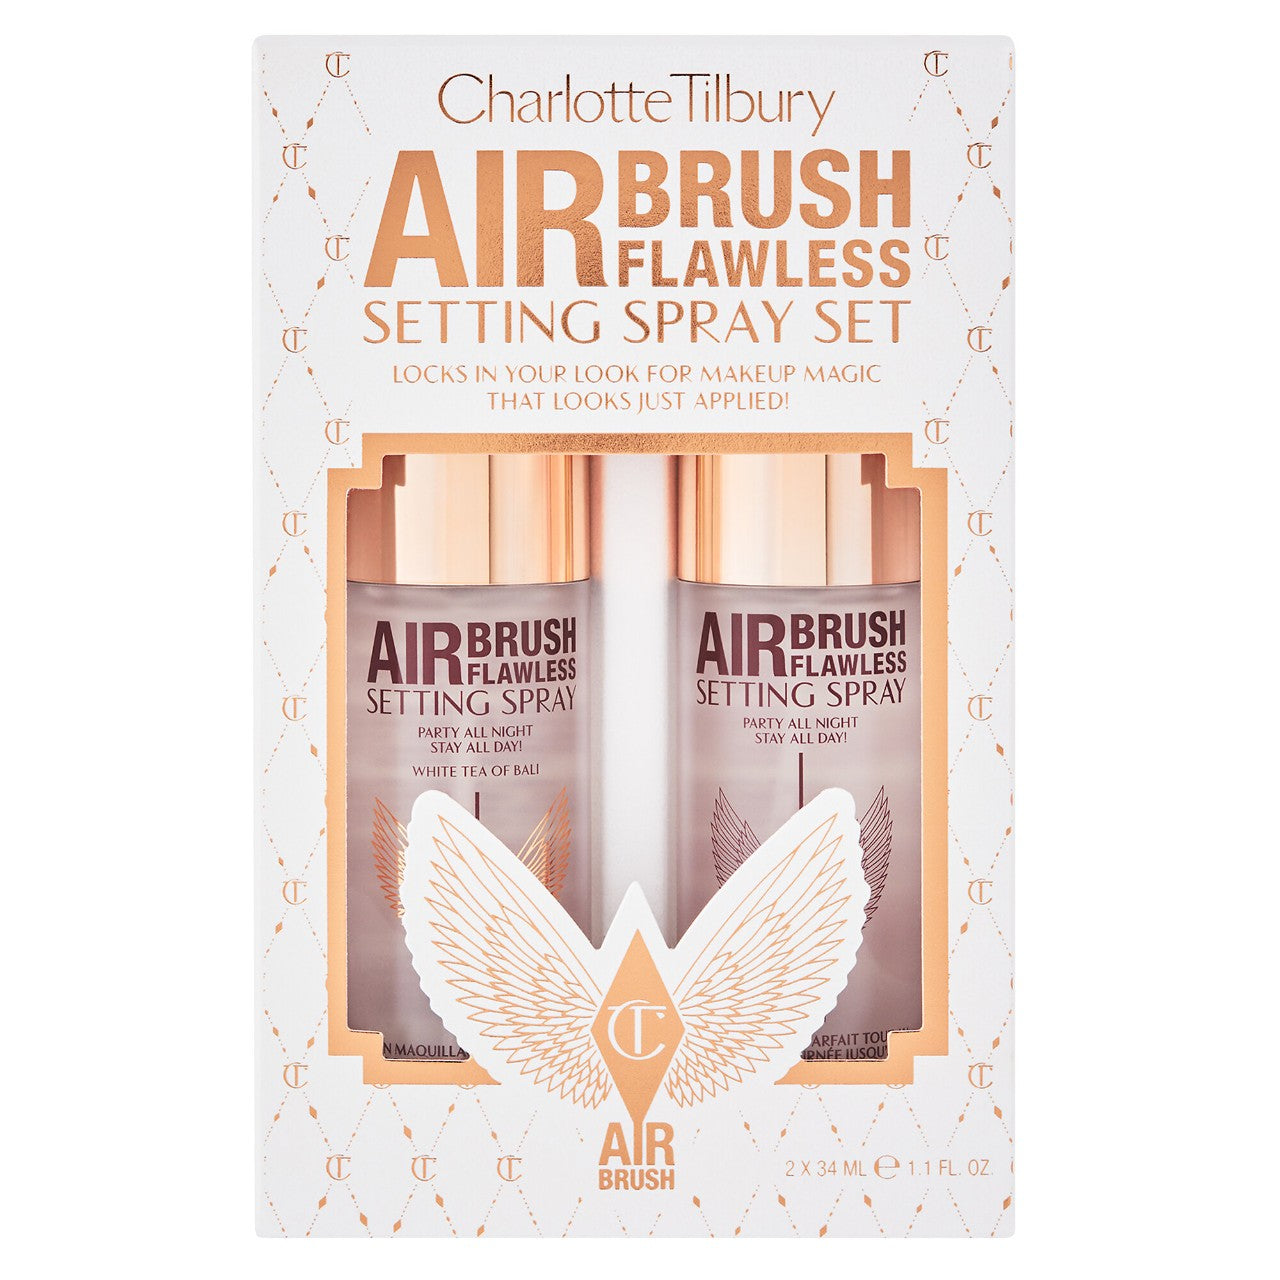 Charlotte Tilbury New! Airbrush Flawless Setting Spray Kit - One-color